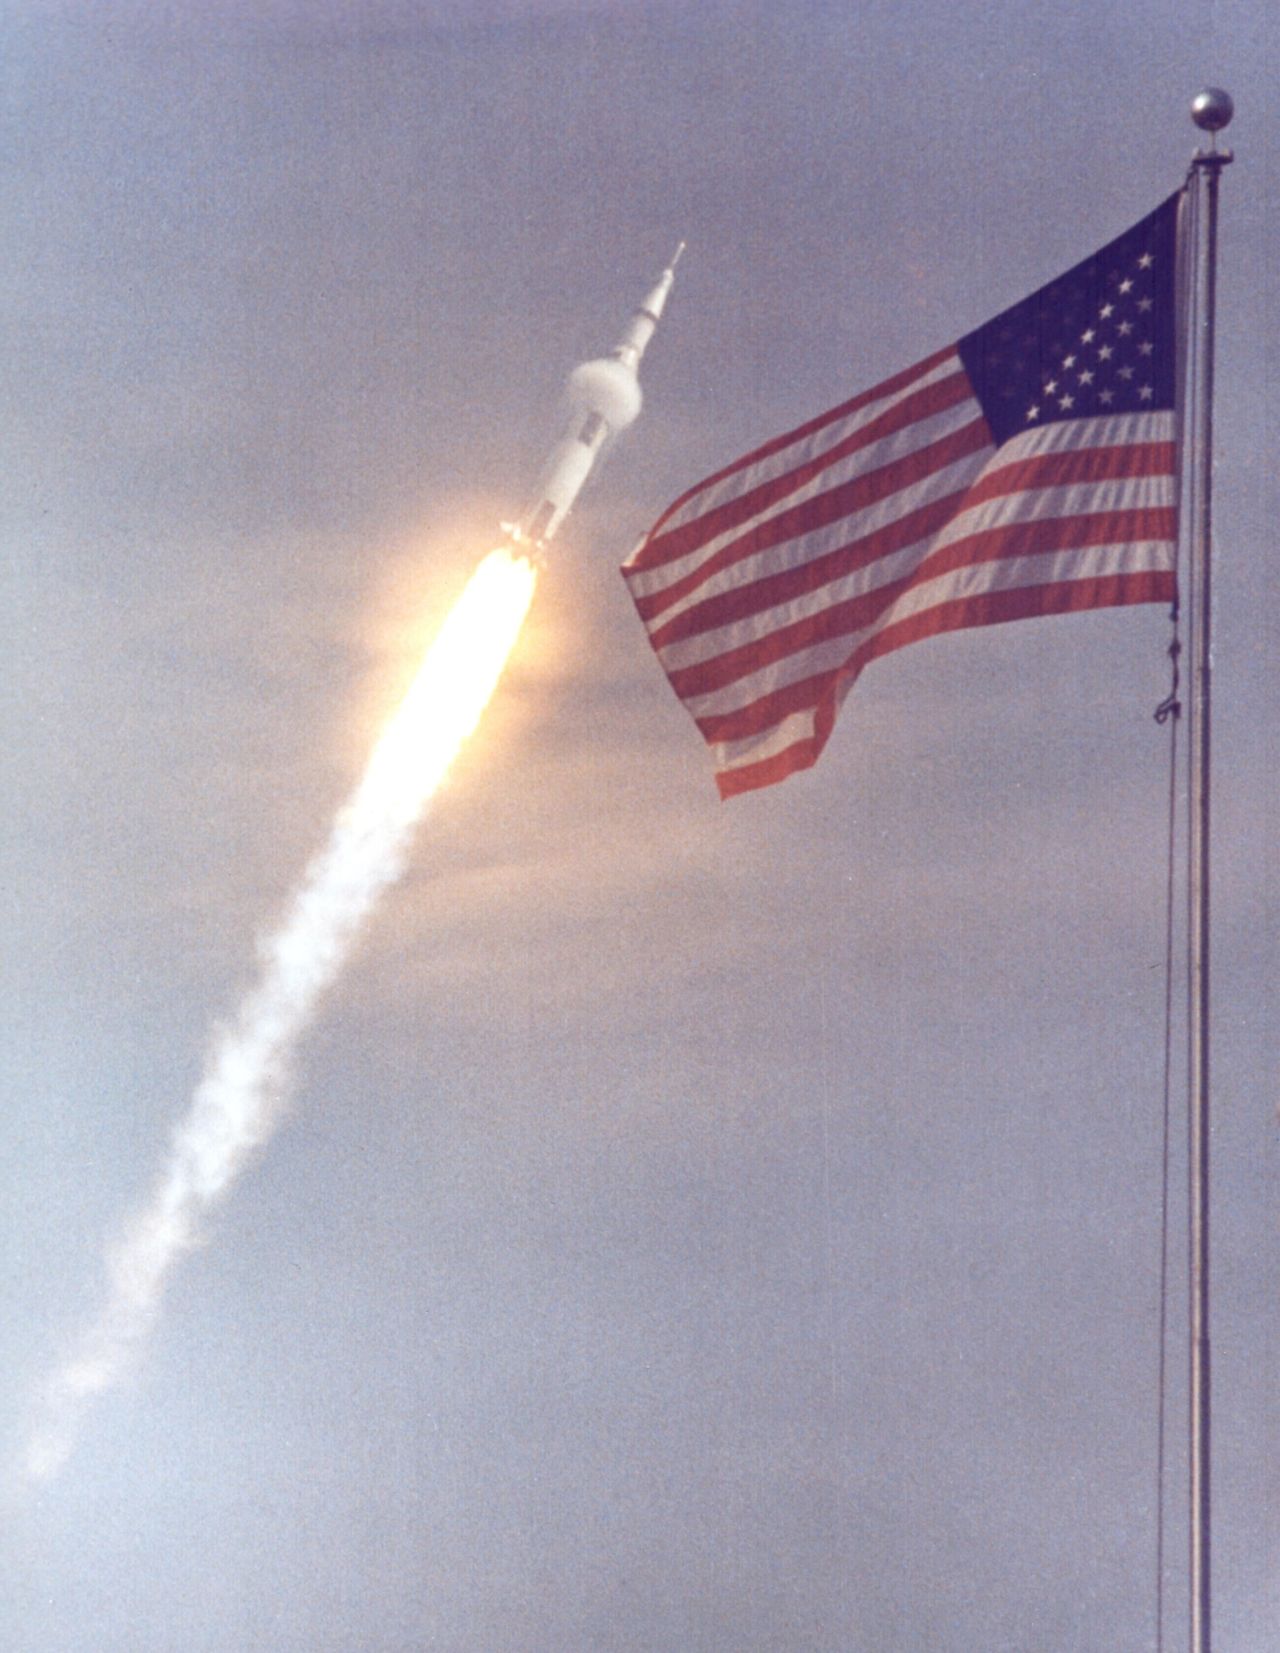 <strong>1967: </strong>By now the US had set its sights on a moon landing, and NASA was busy designing a rocket for that purpose. It built the Saturn V, <a href="https://www.nasa.gov/audience/forstudents/5-8/features/nasa-knows/what-was-the-saturn-v-58.html" target="_blank" target="_blank">a huge and powerful </a>rocket. At 111 meters (364 feet) tall, it was about the height of a 36-story building, and weighed 2.8 million kilograms (6.2 million pounds). The first Saturn V test launch was in 1967, but two years later it made its first<strong> </strong>lunar landing mission, launching Apollo 11 (pictured). 